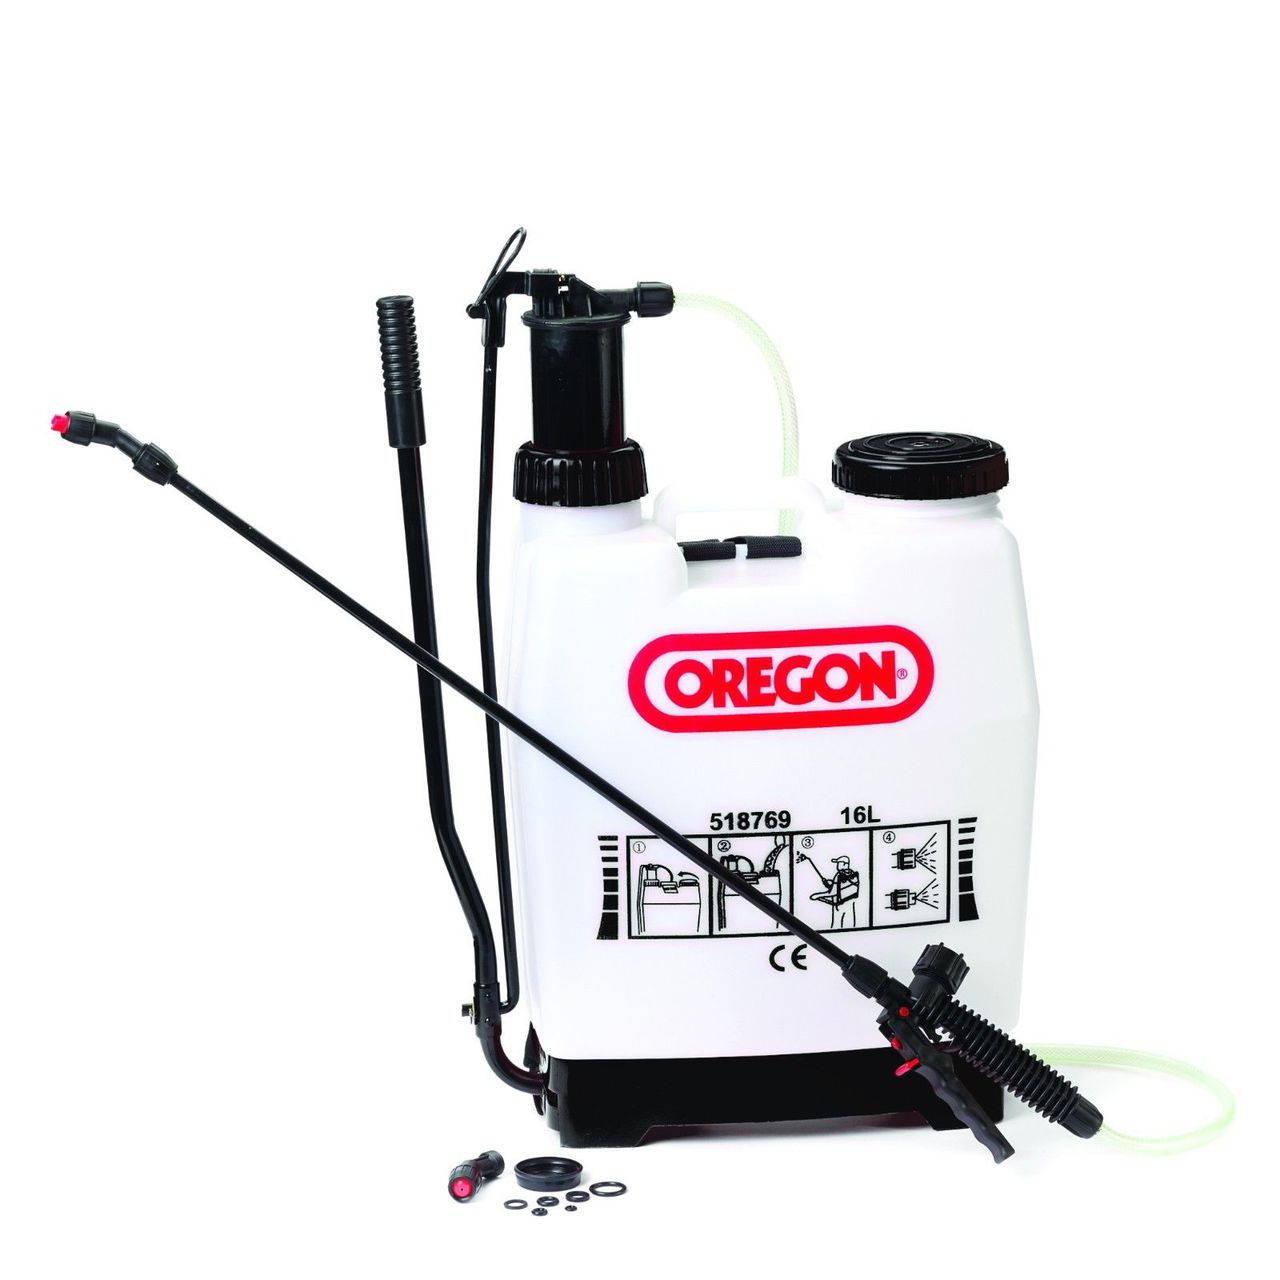 Oregon 16L 4 Gallon Sprayer with Shoulder Strap and Spare Seal Kit 518769